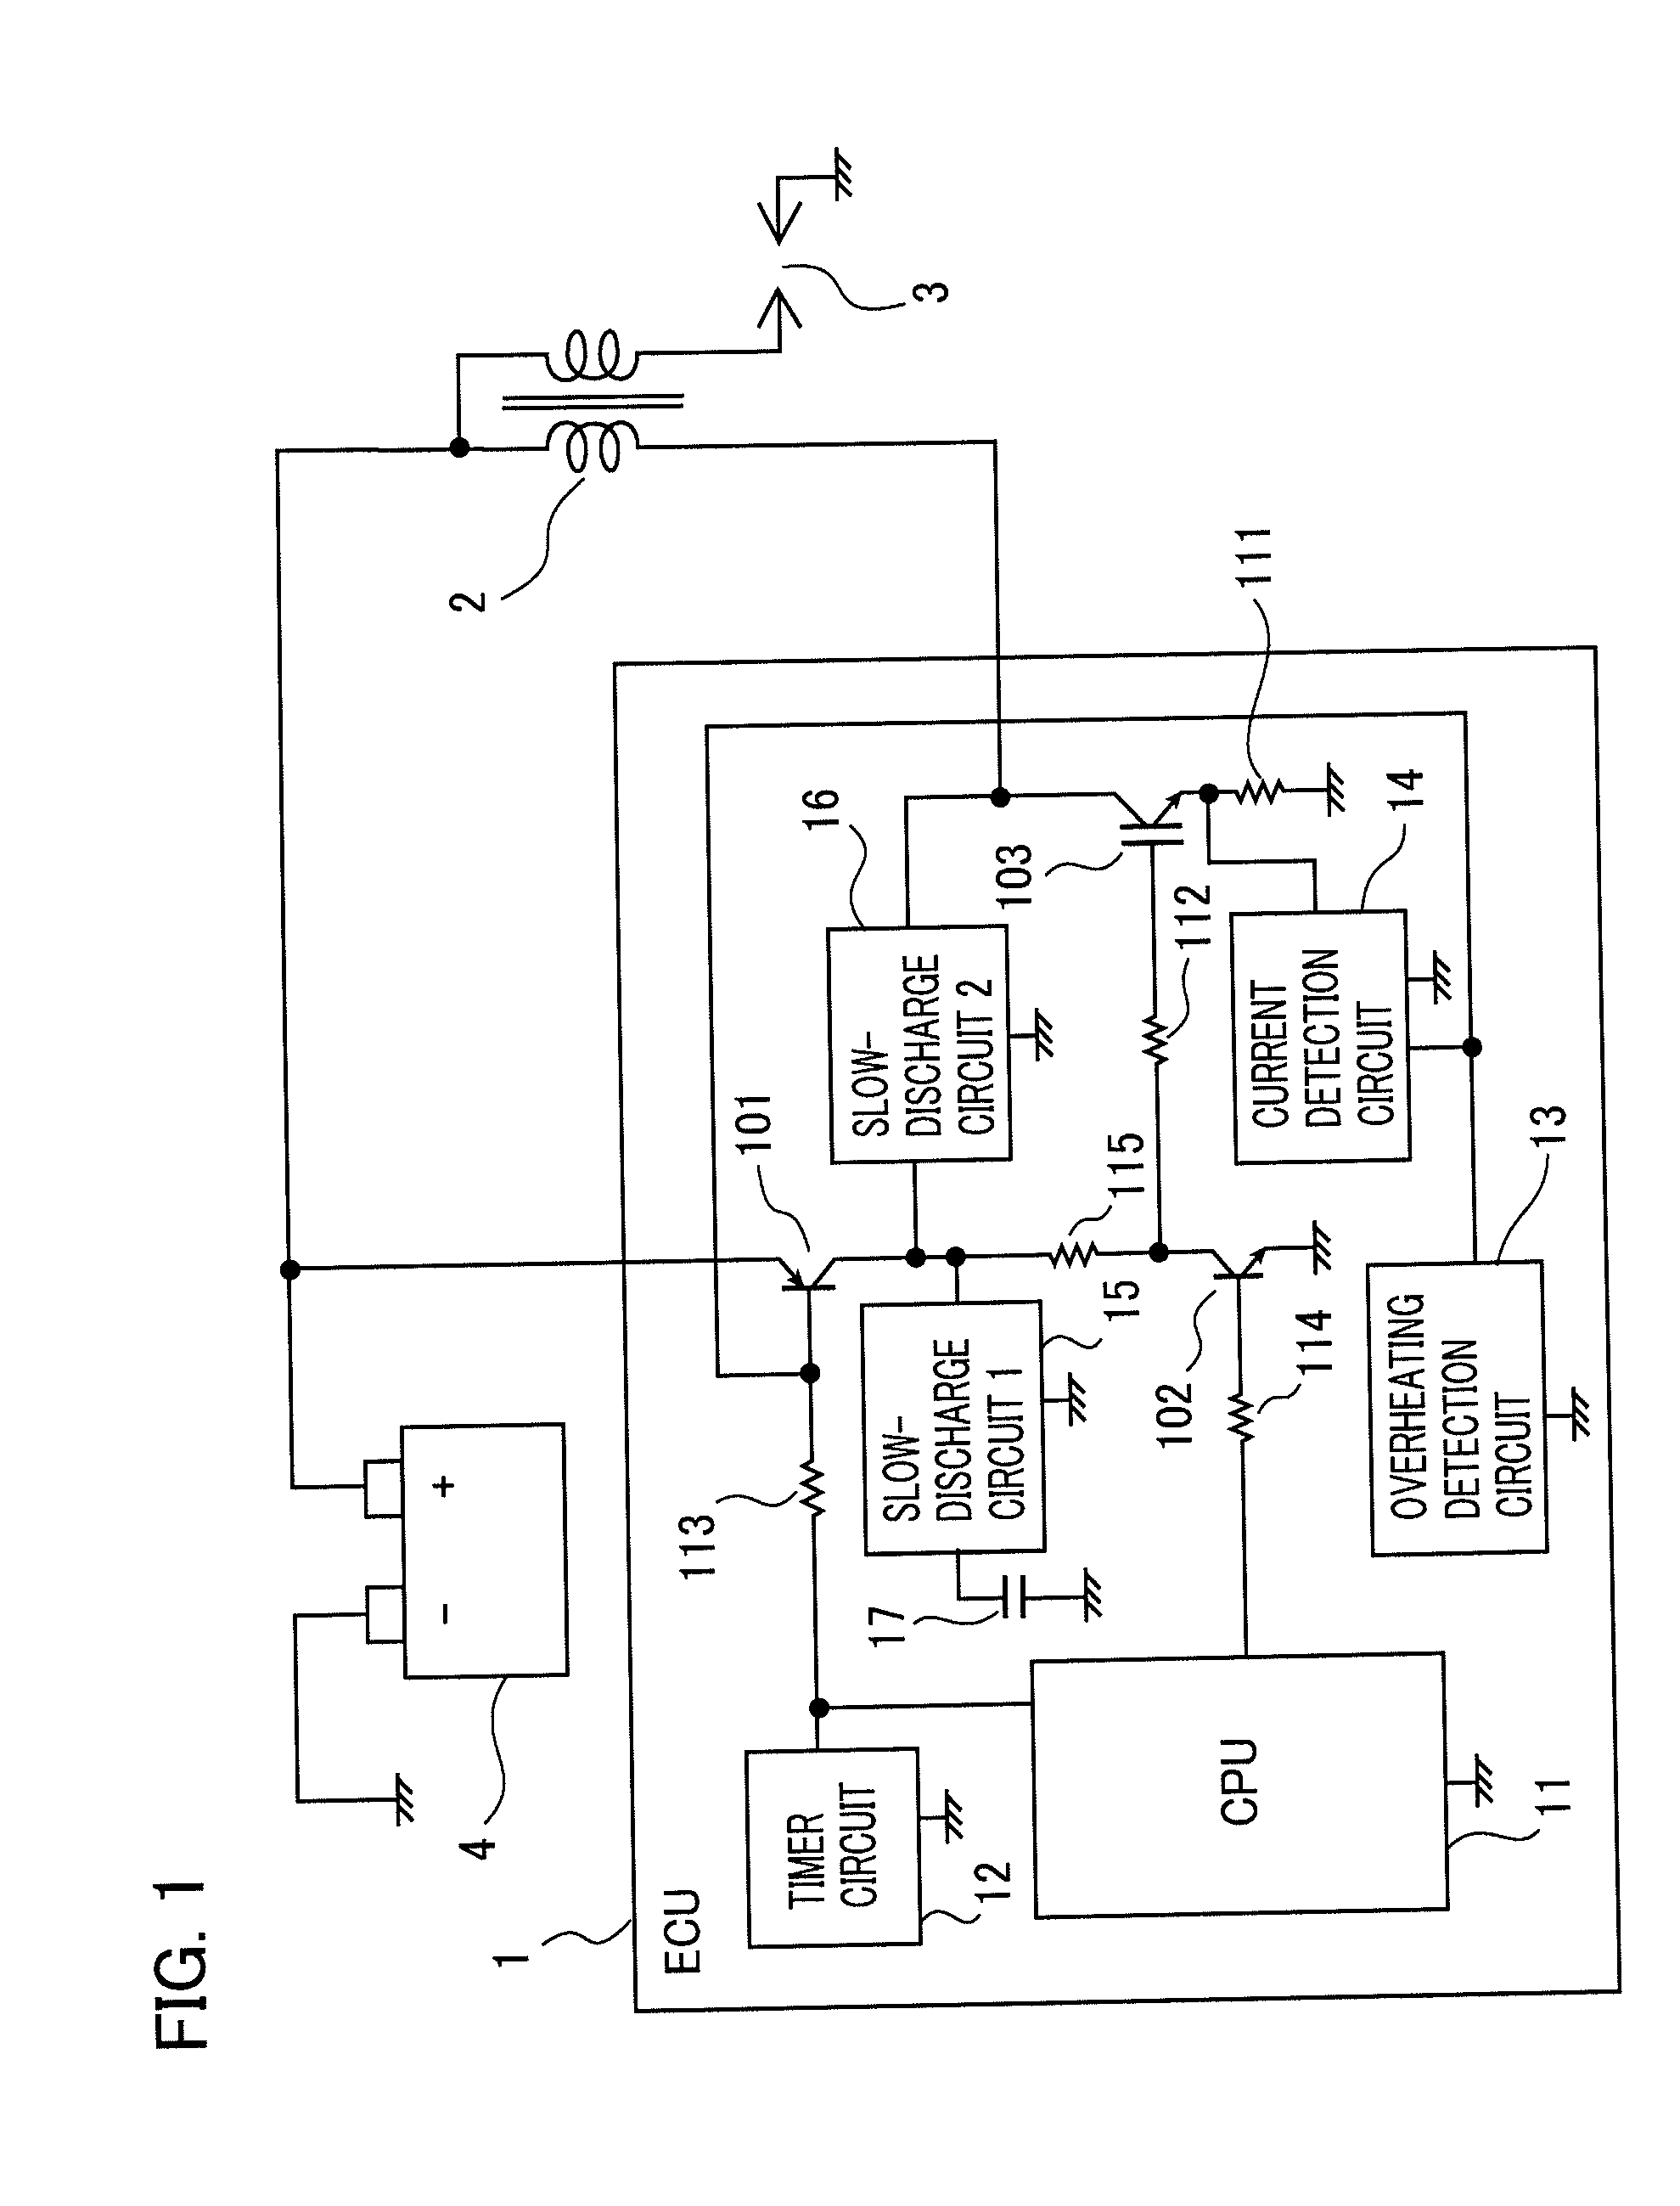 Internal-combustion-engine electronic control system